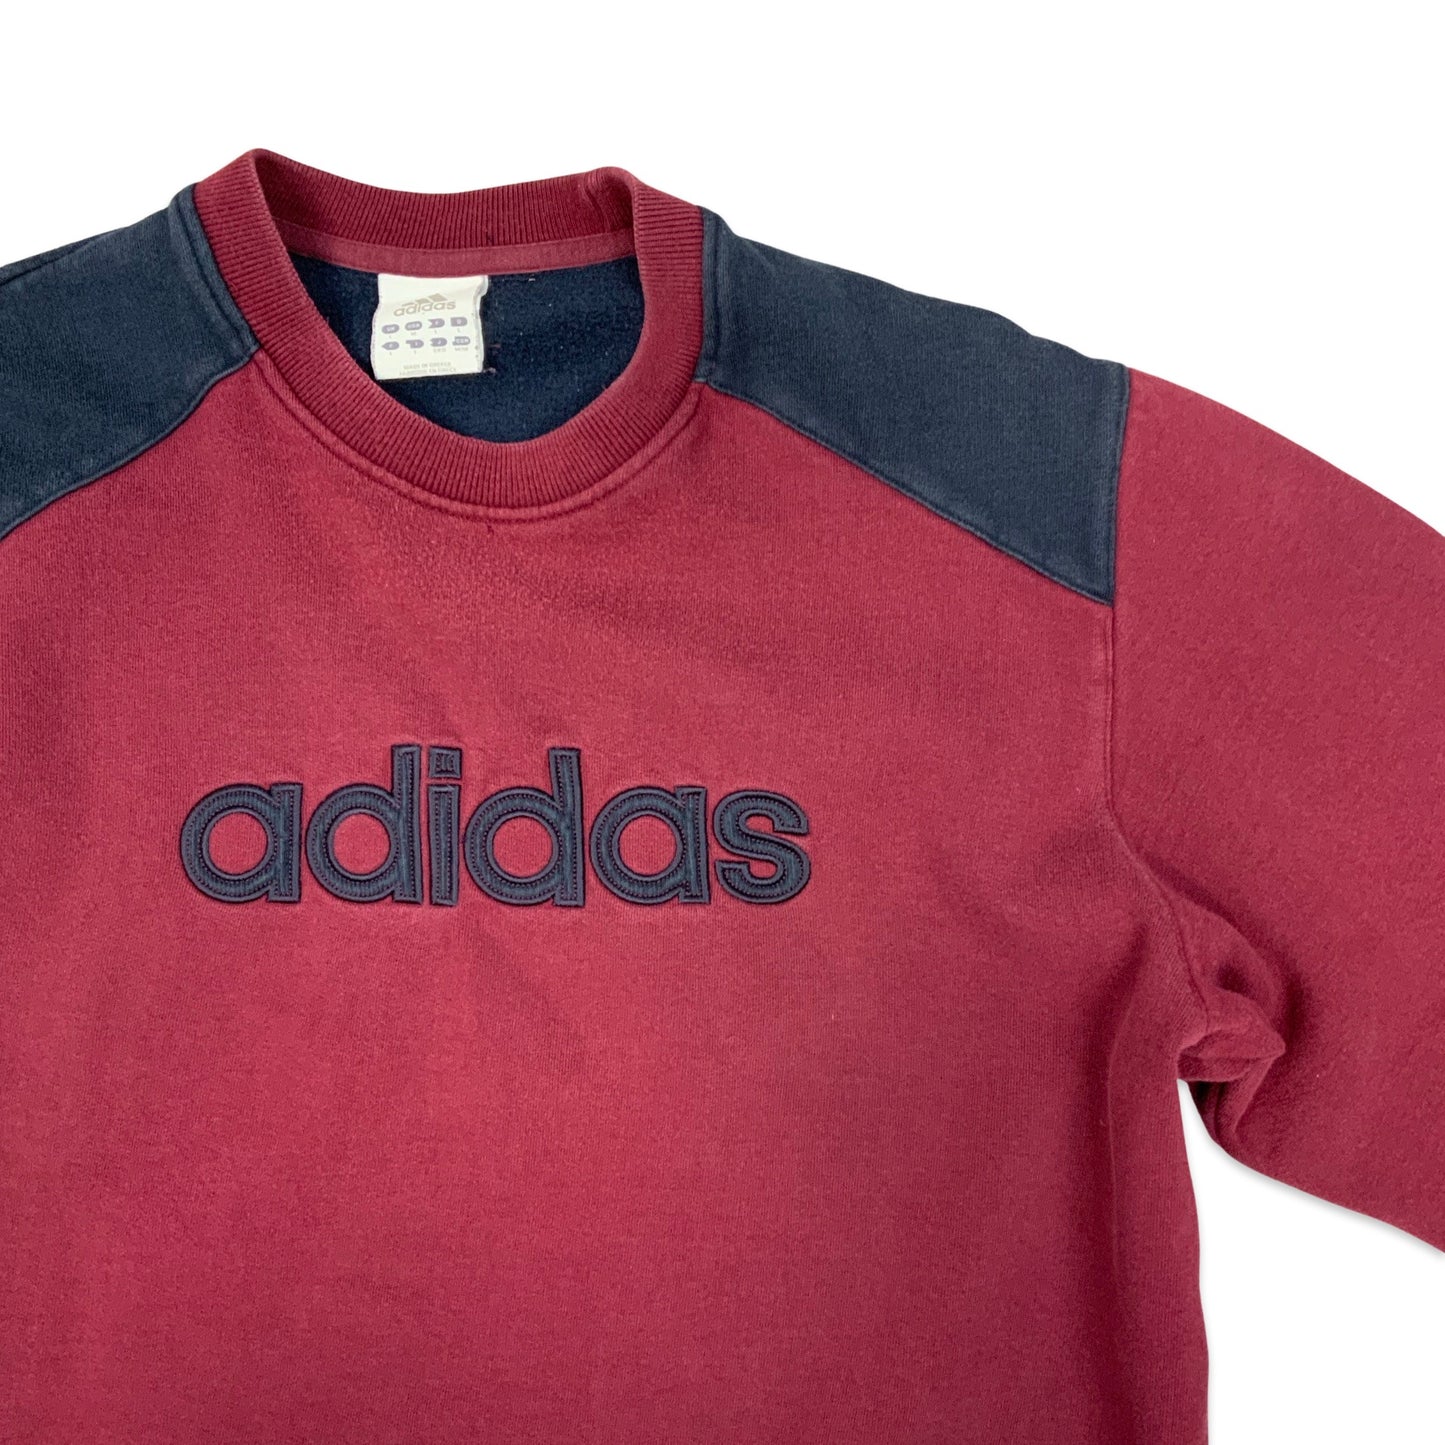 Vintage 00's Adidas Maroon & Navy Spell Out Crew Neck Sweatshirt M L